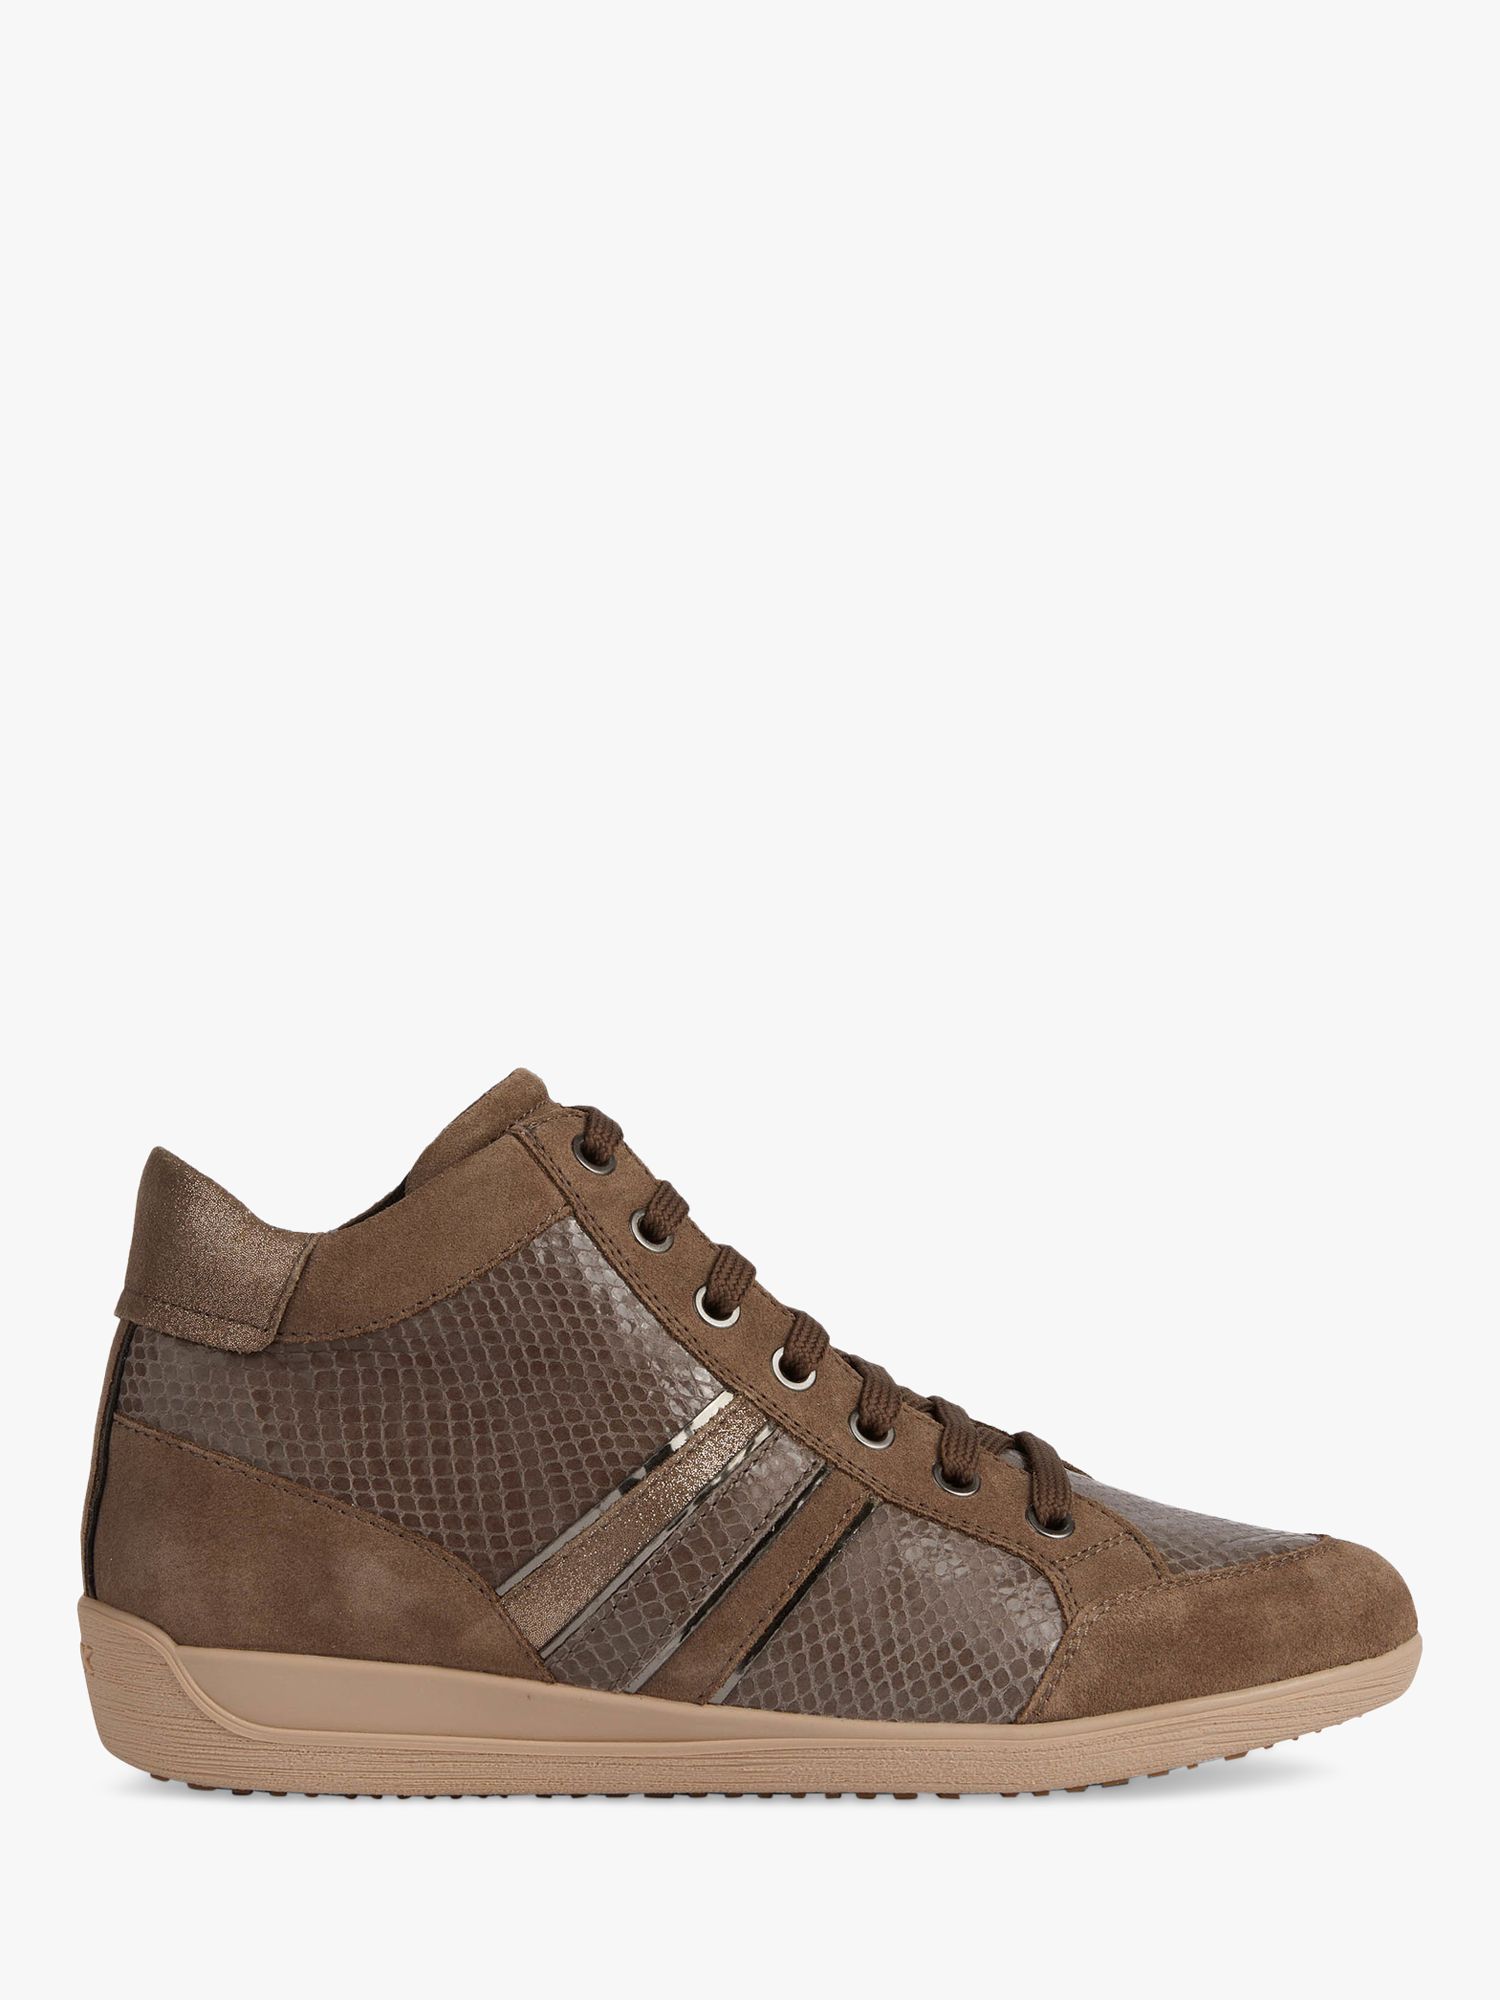 Geox Leather Suede High Trainers, Brown at John Lewis & Partners